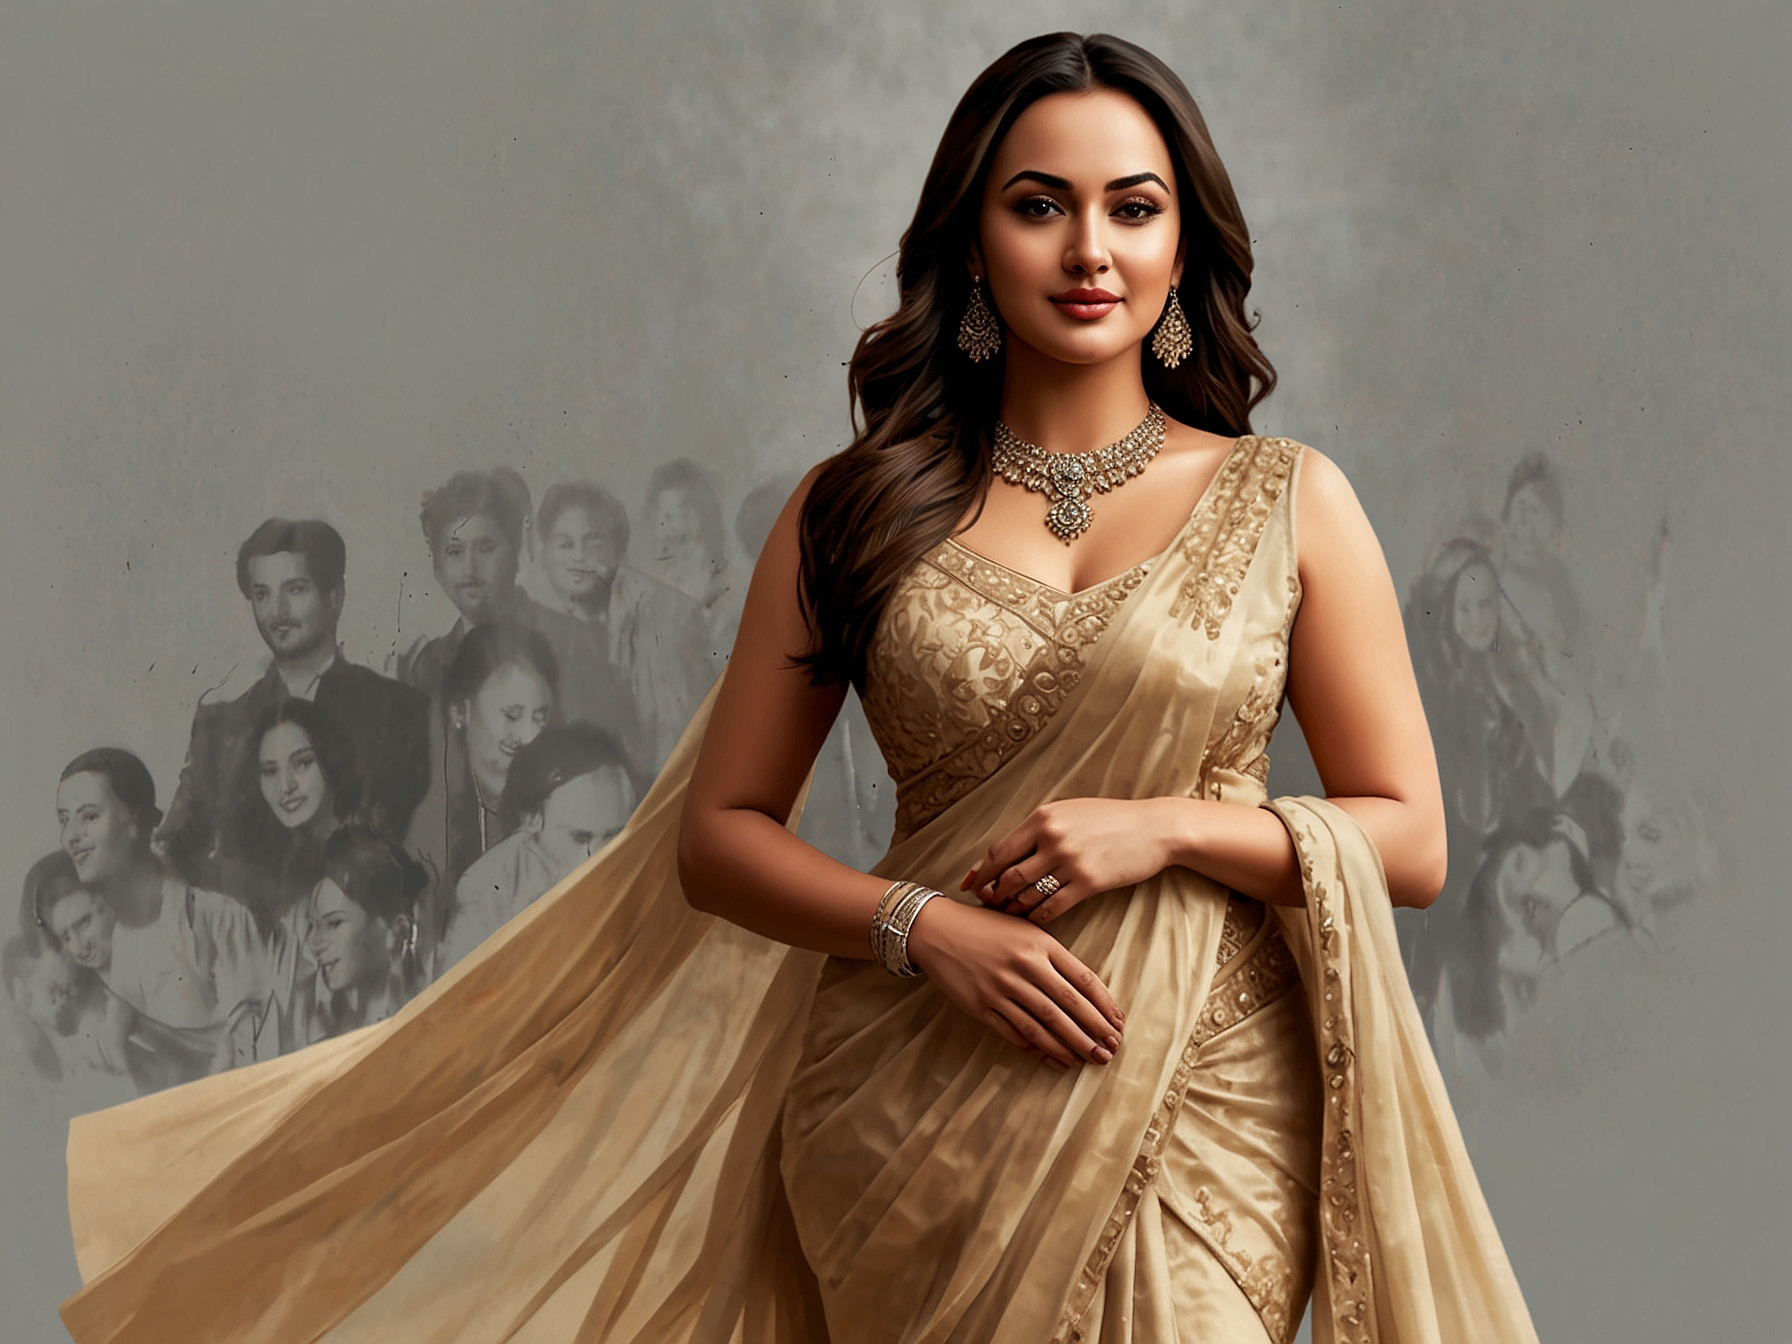 Sonakshi Sinha in a previous public appearance, elegantly dressed in a beige outfit, reflecting her timeless style and fashion preference. Fans eagerly await her wedding day look with great anticipation.